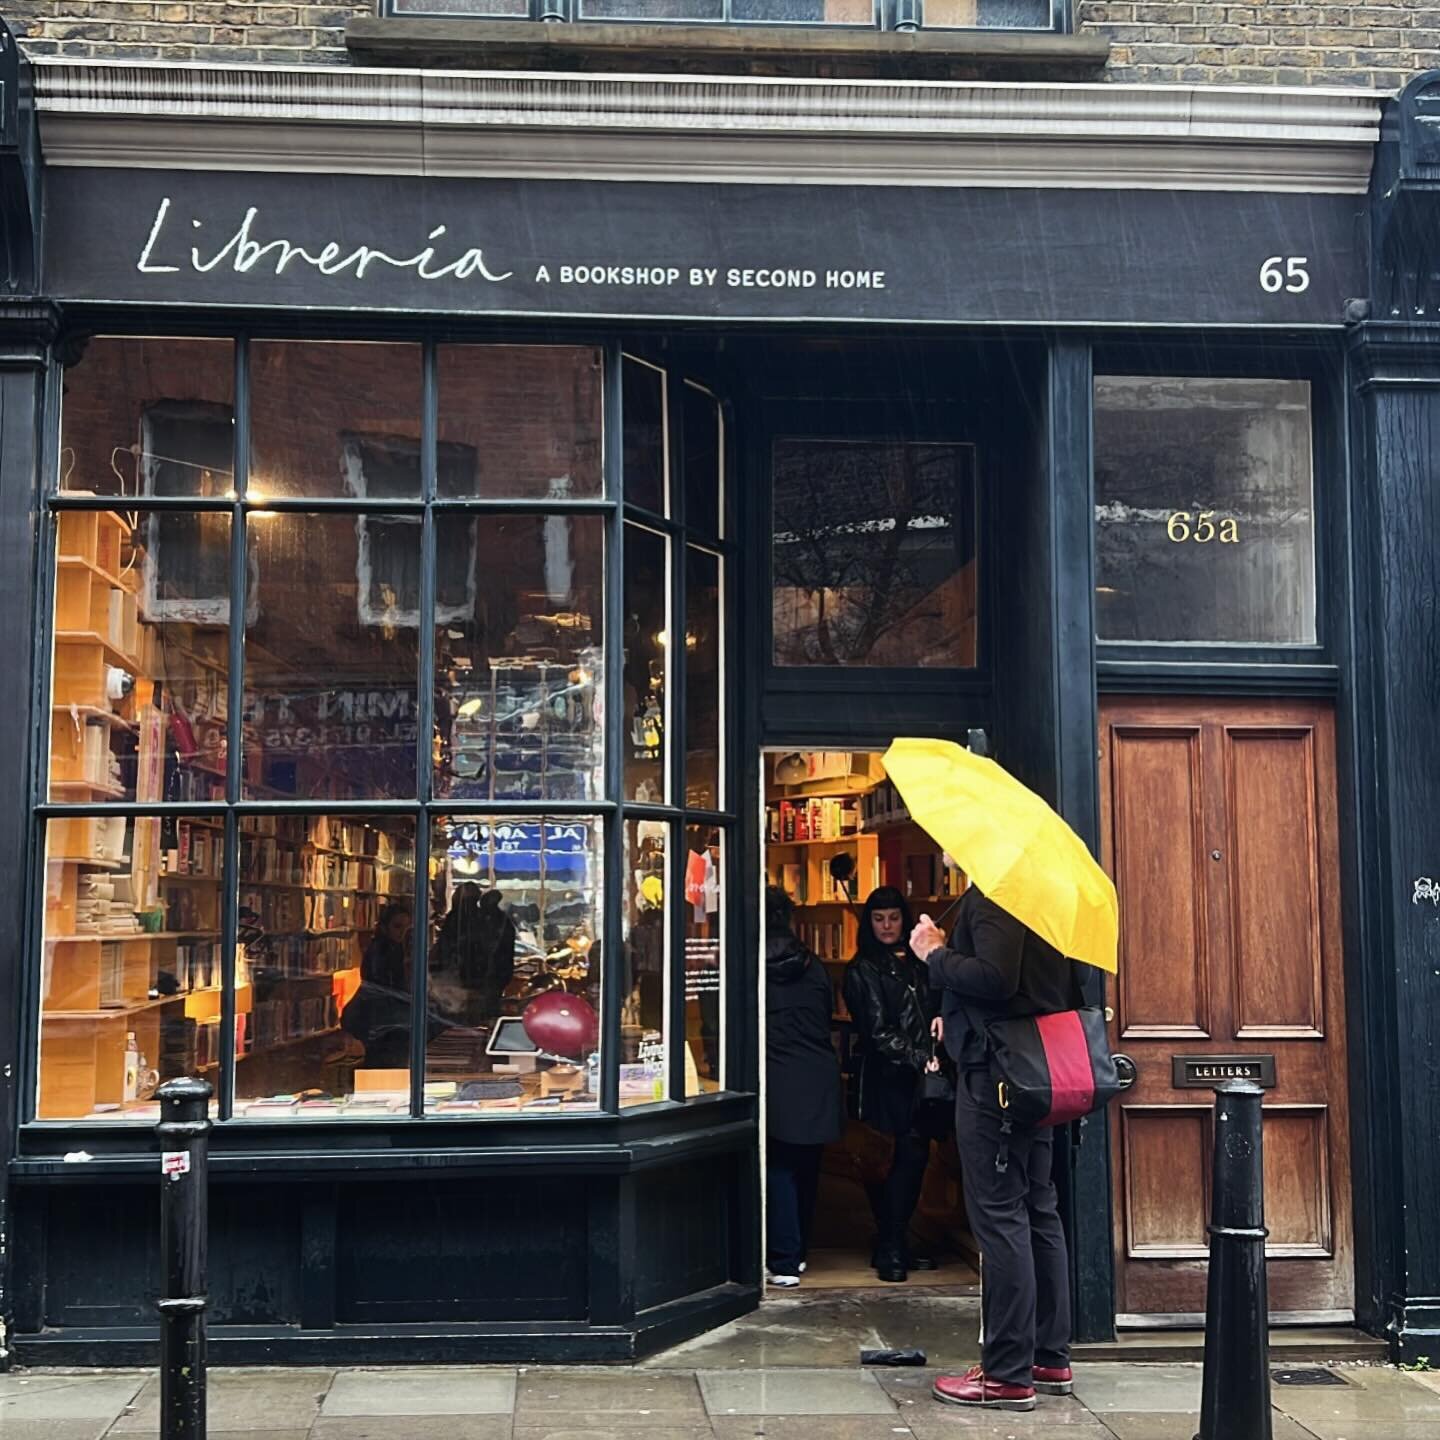 #FlashbackFriday - On my recent trip to London, I wanted to visit bookstores that I hadn&rsquo;t ventured to on previous trips. I spent my final day in London at @librerialondon. What a cute and intimate space. Tiny in size but mighty in their awesom